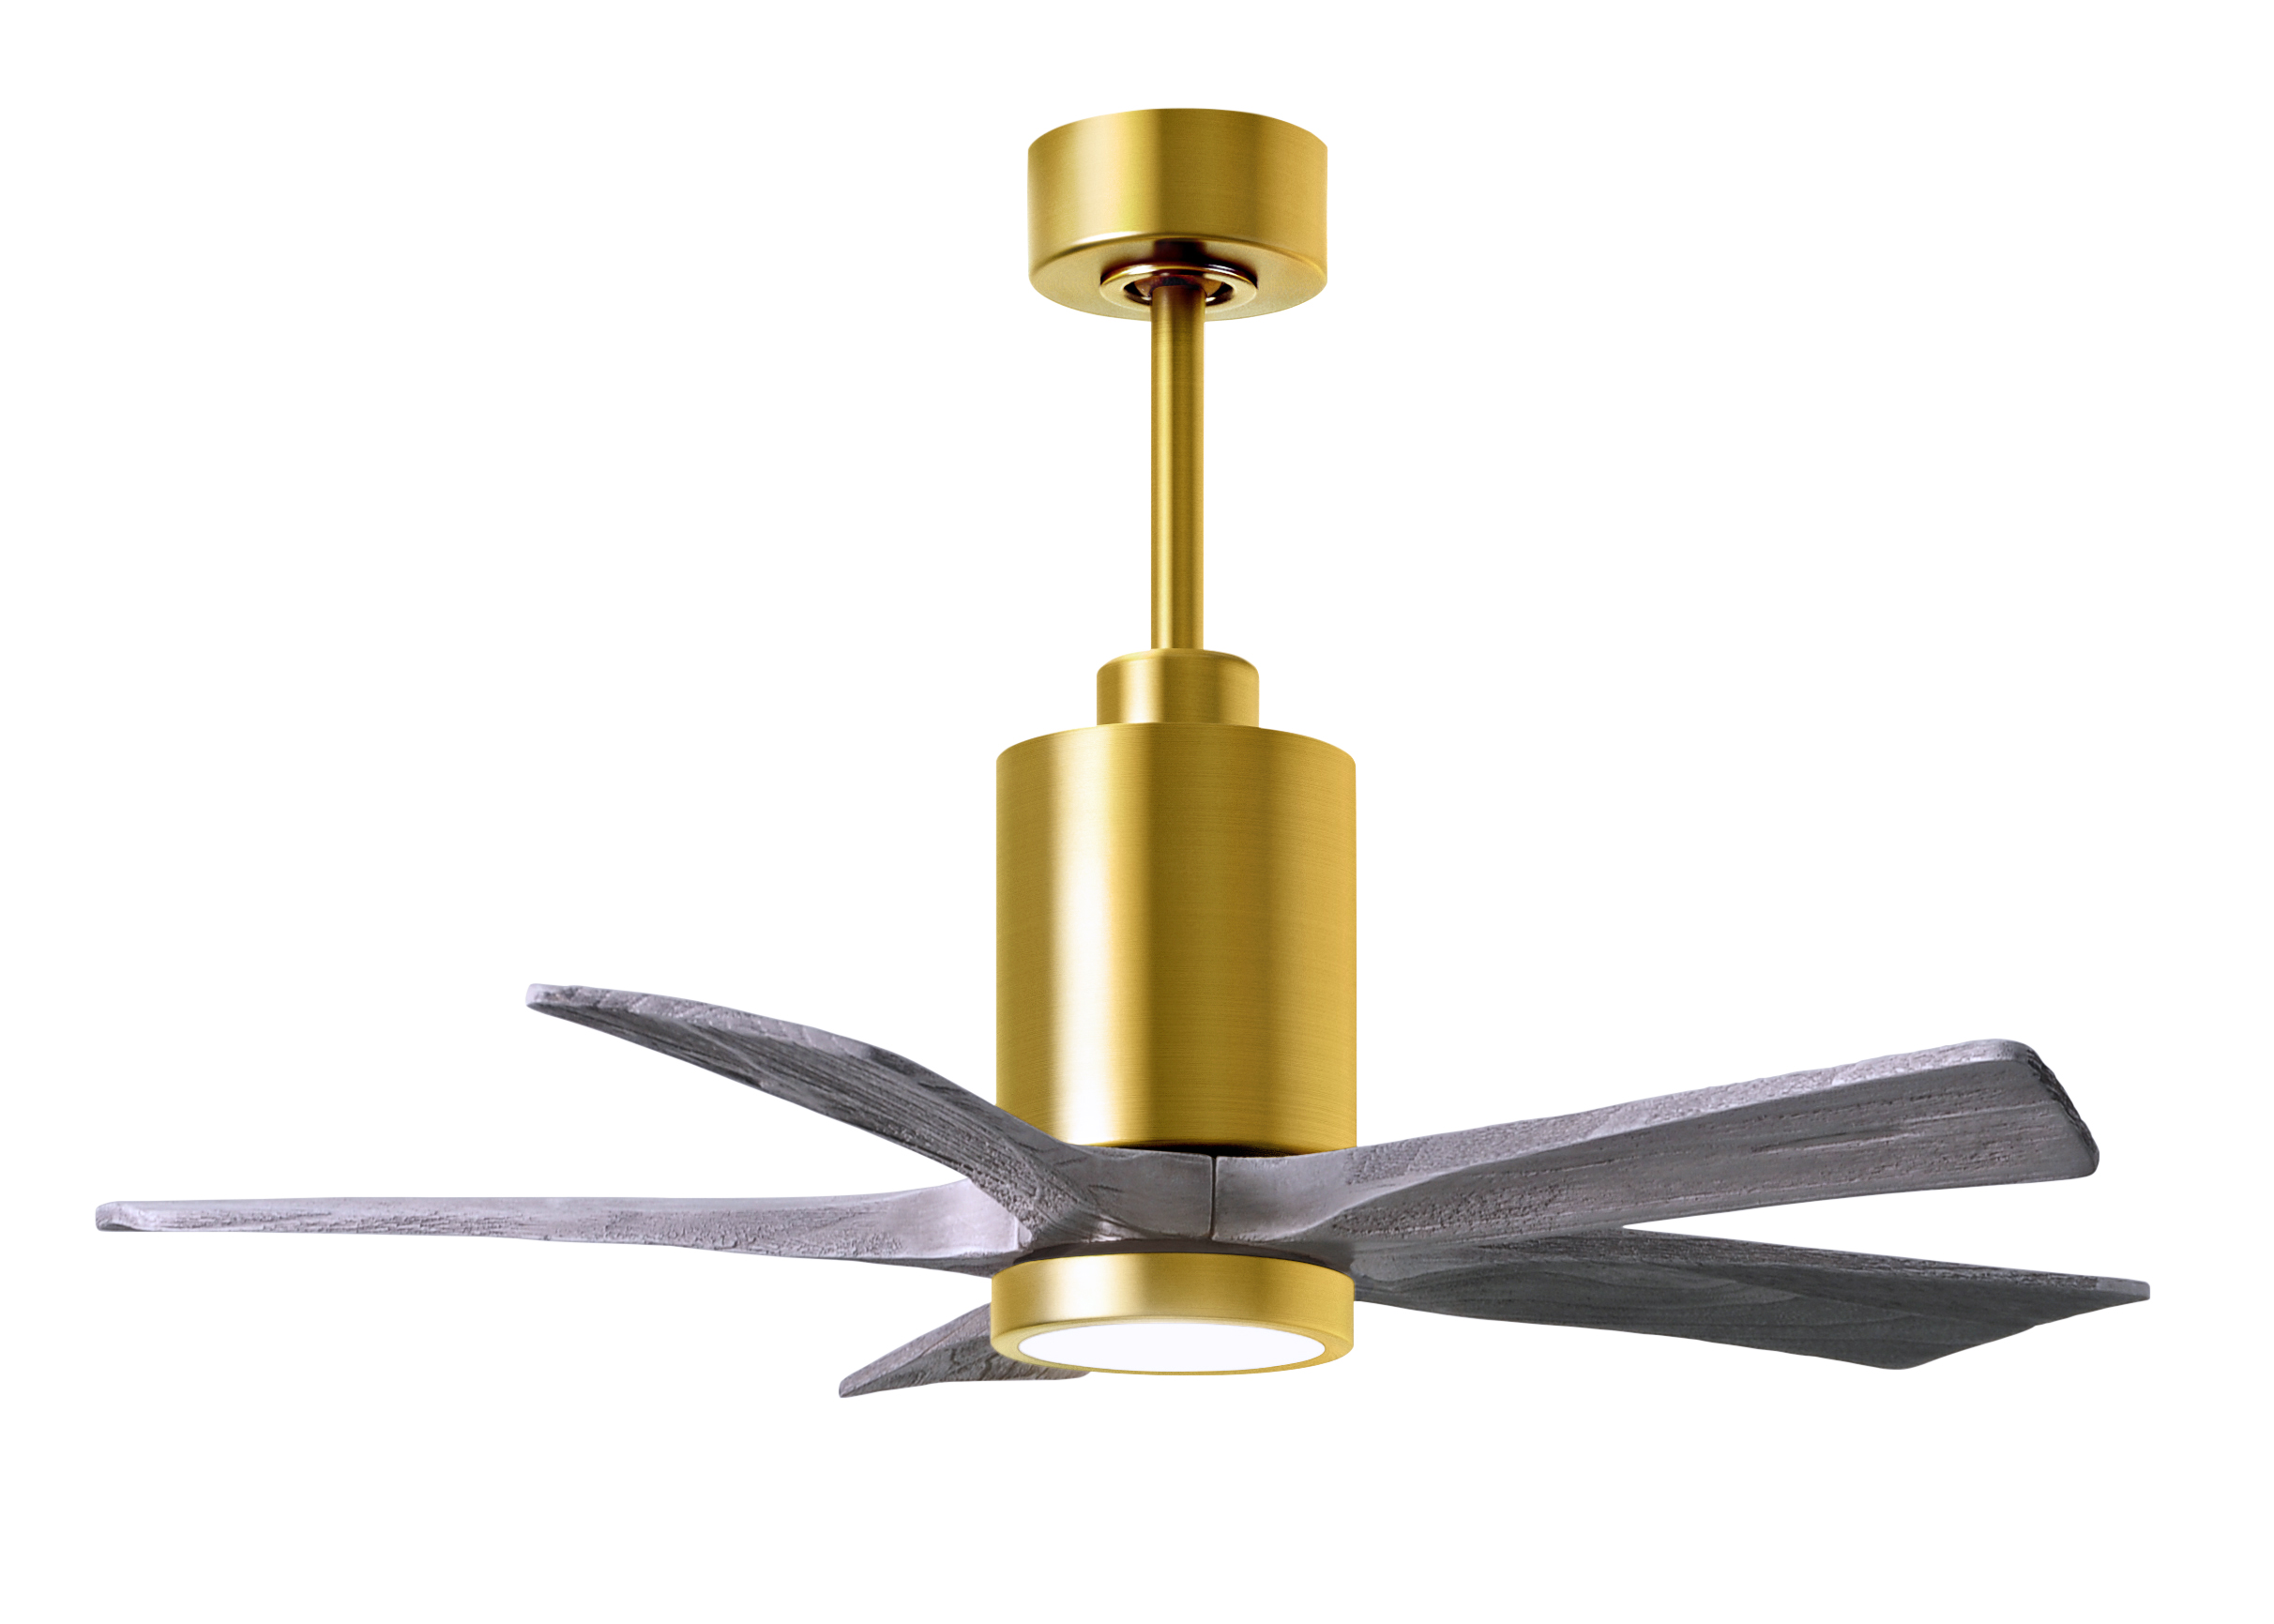 Patrícia–5 Ceiling Fan in Brushed Brass with 42” Barn Wood Blades